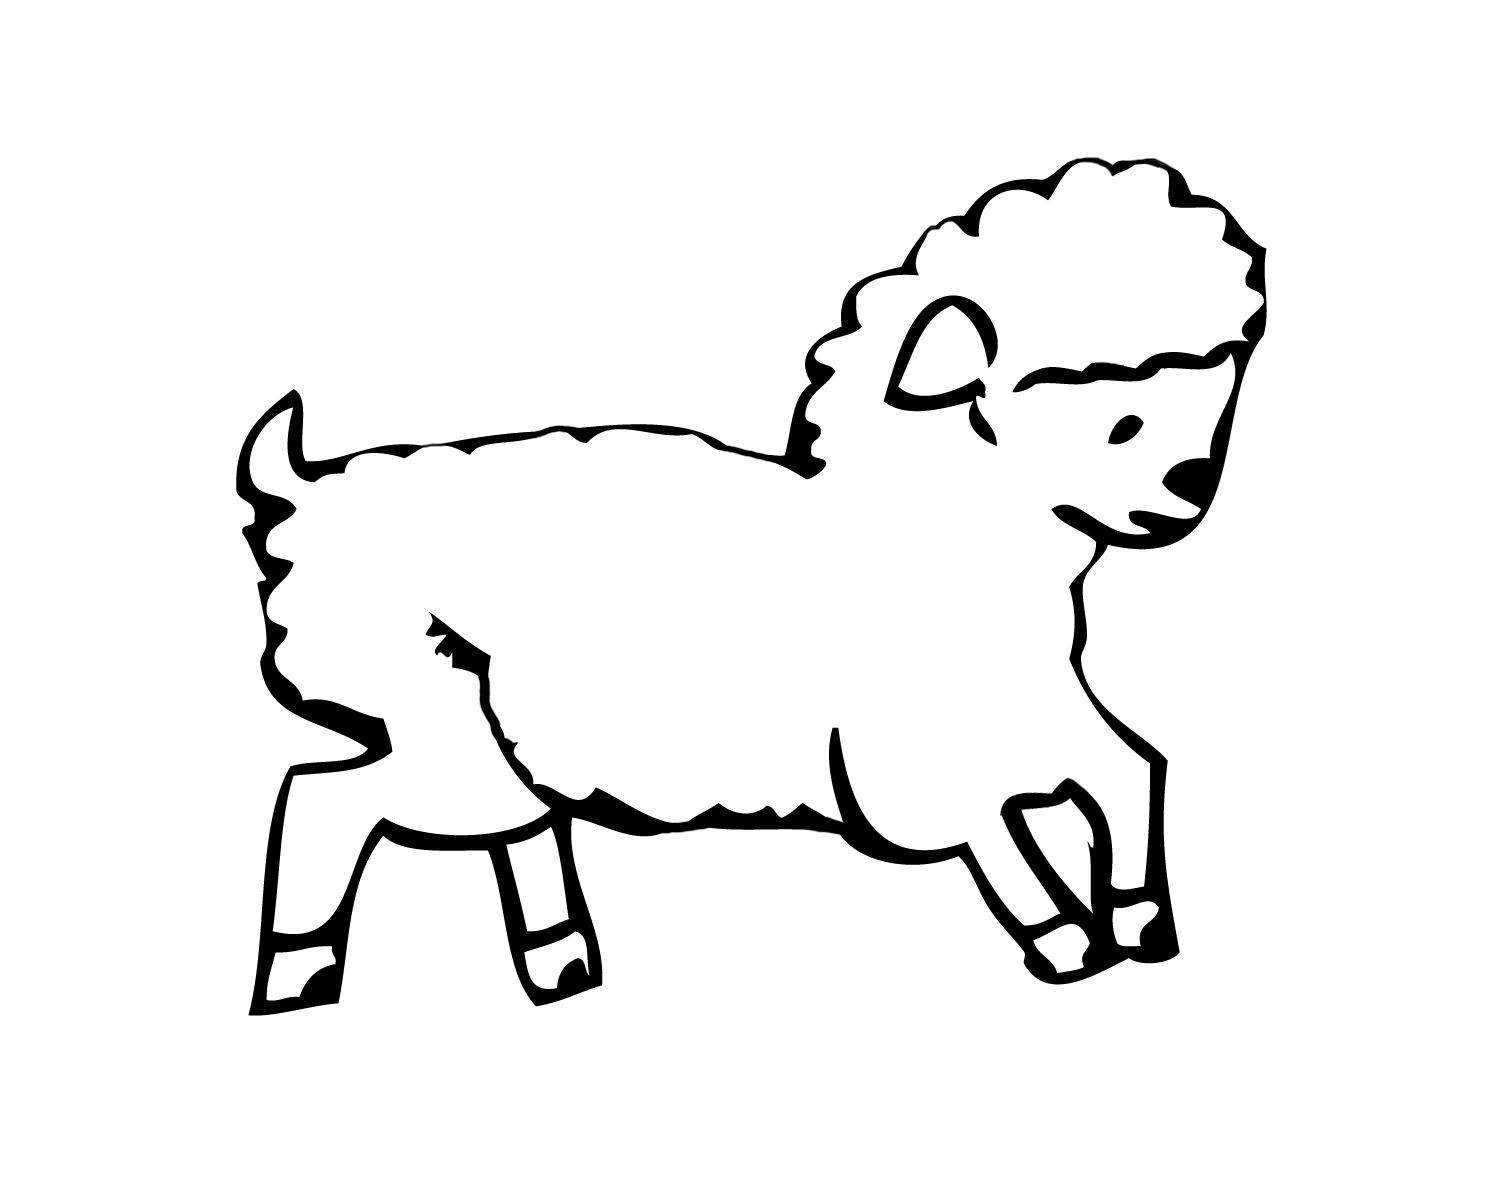 Printable Lamb Template This Lamb Is A Simple Cut And Paste Paper Craft